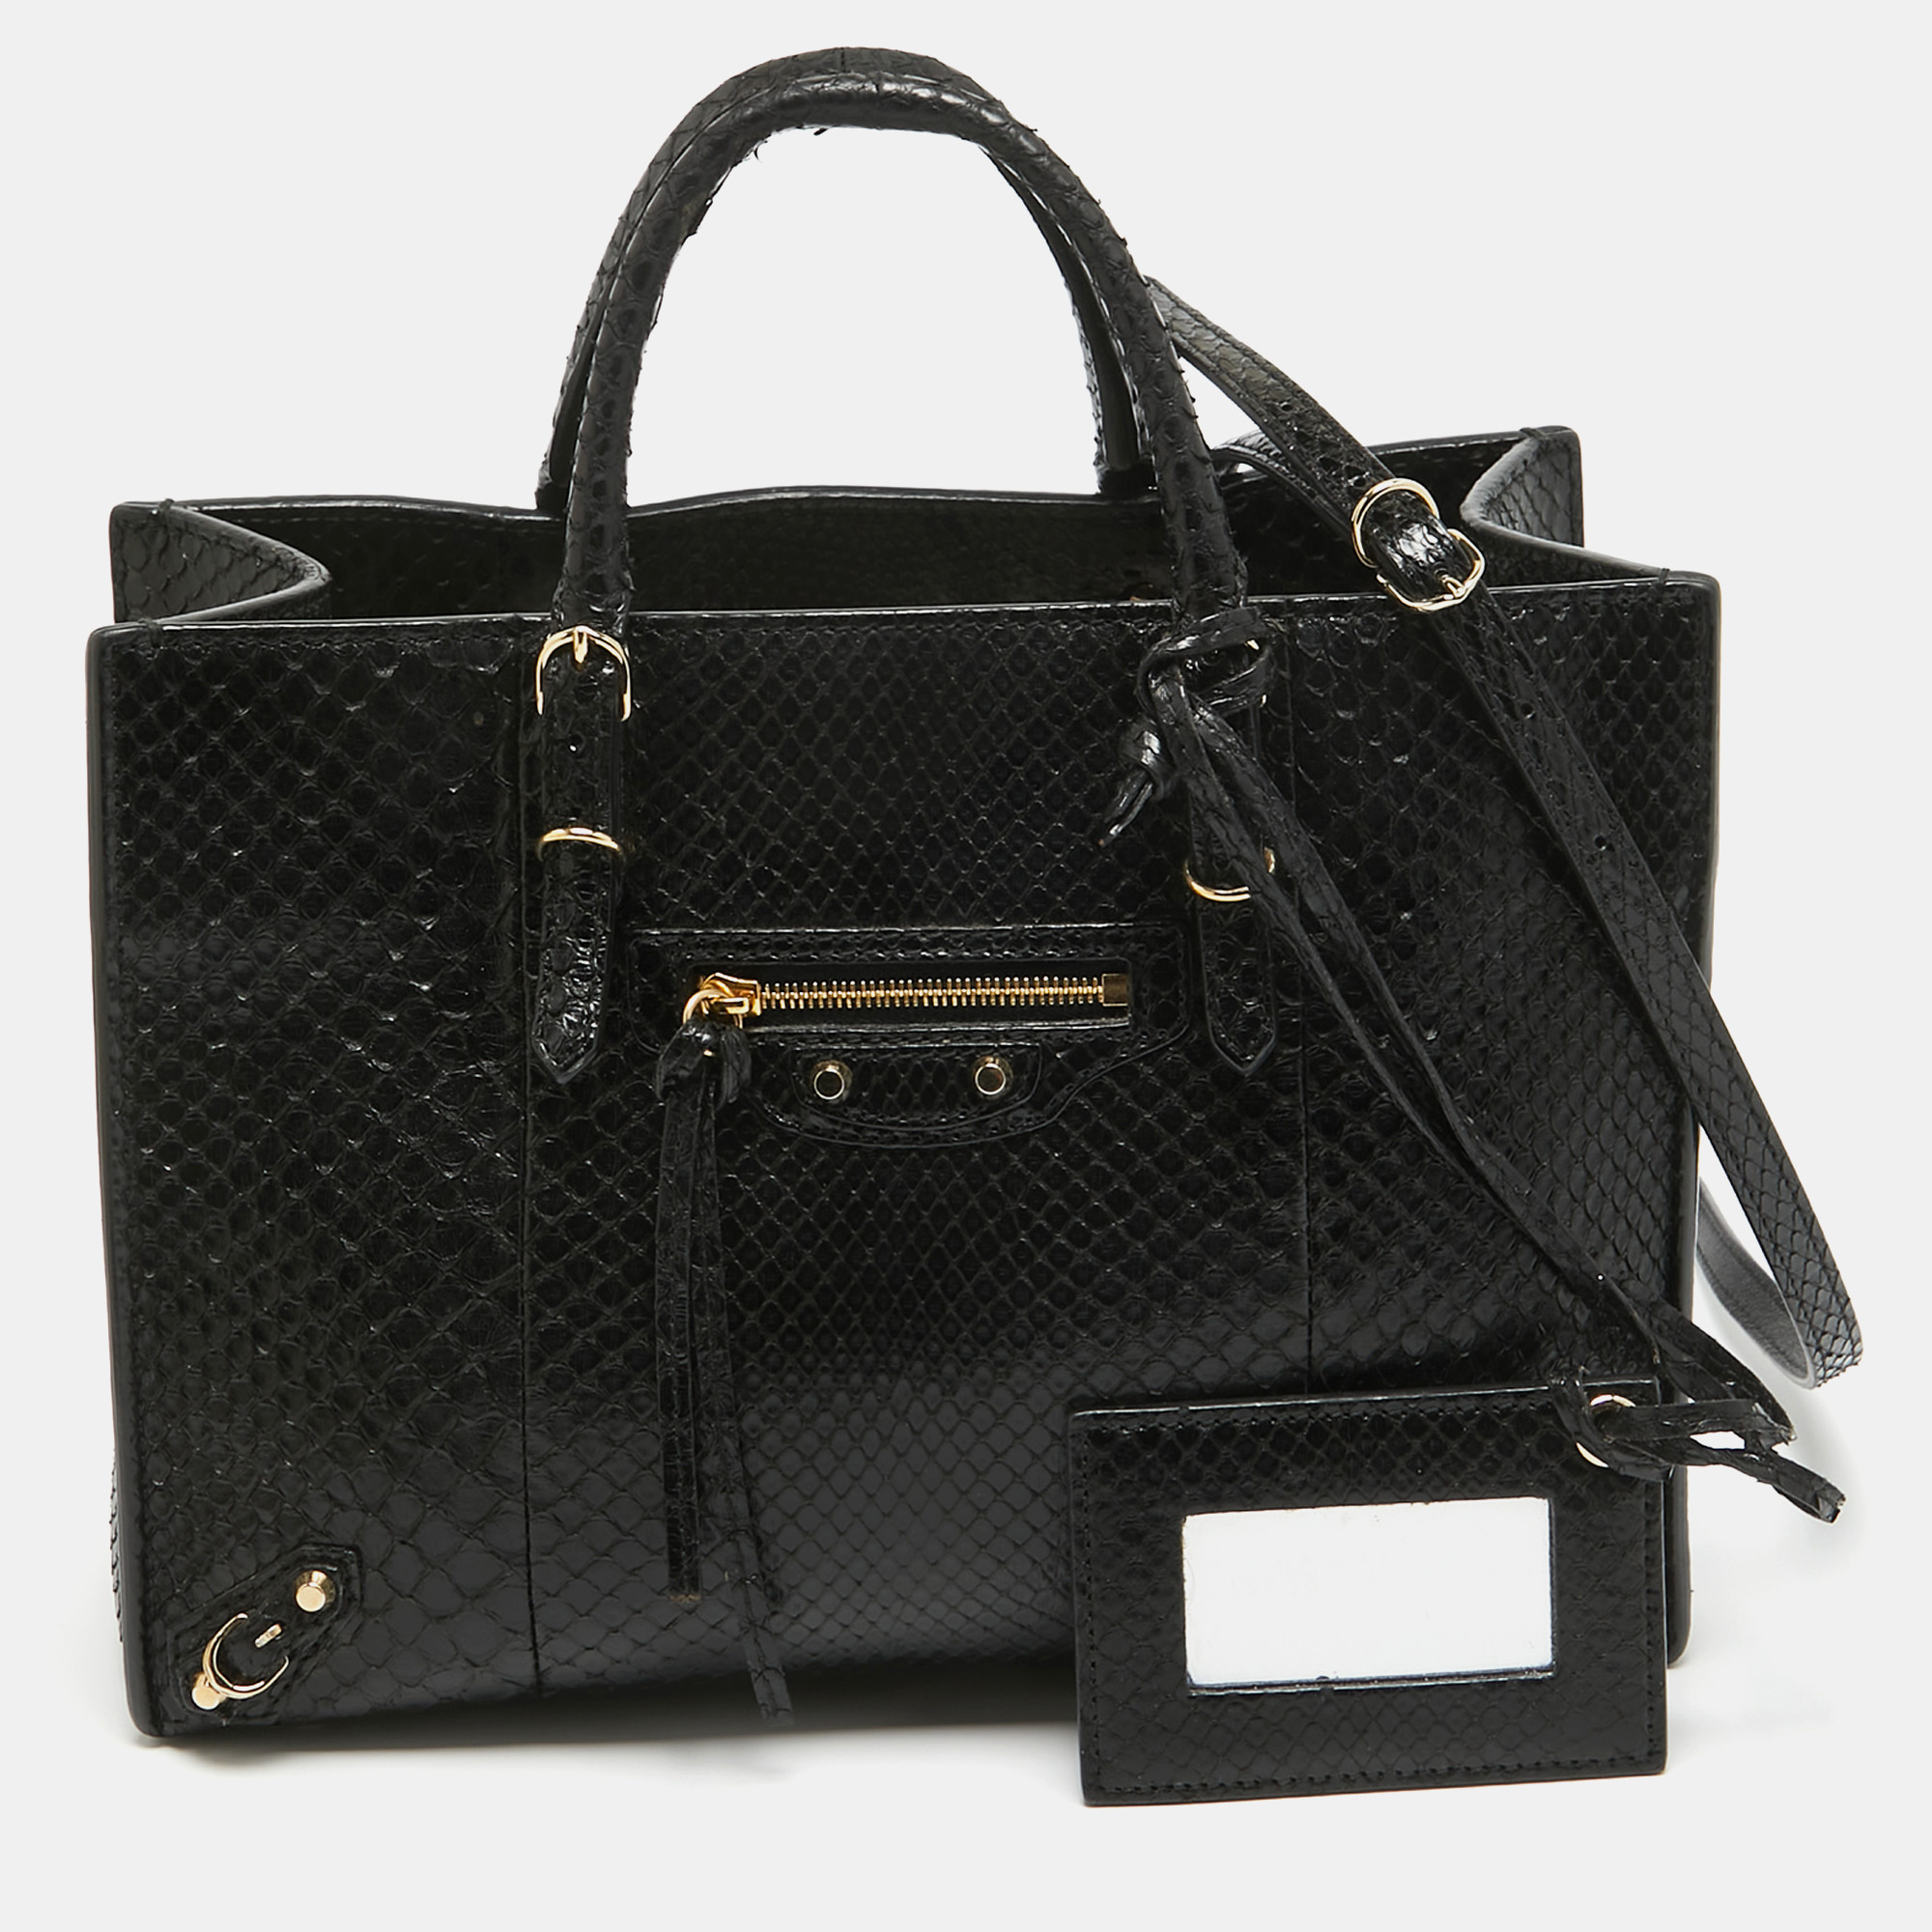 The Papier A6 bag from Balenciaga smoothly blends luxury with practical fashion. It comes crafted from python leather and styled with two top handles a leather interior and a pocket mirror. The zippers and buckle detailing make the bag such a worthy catch